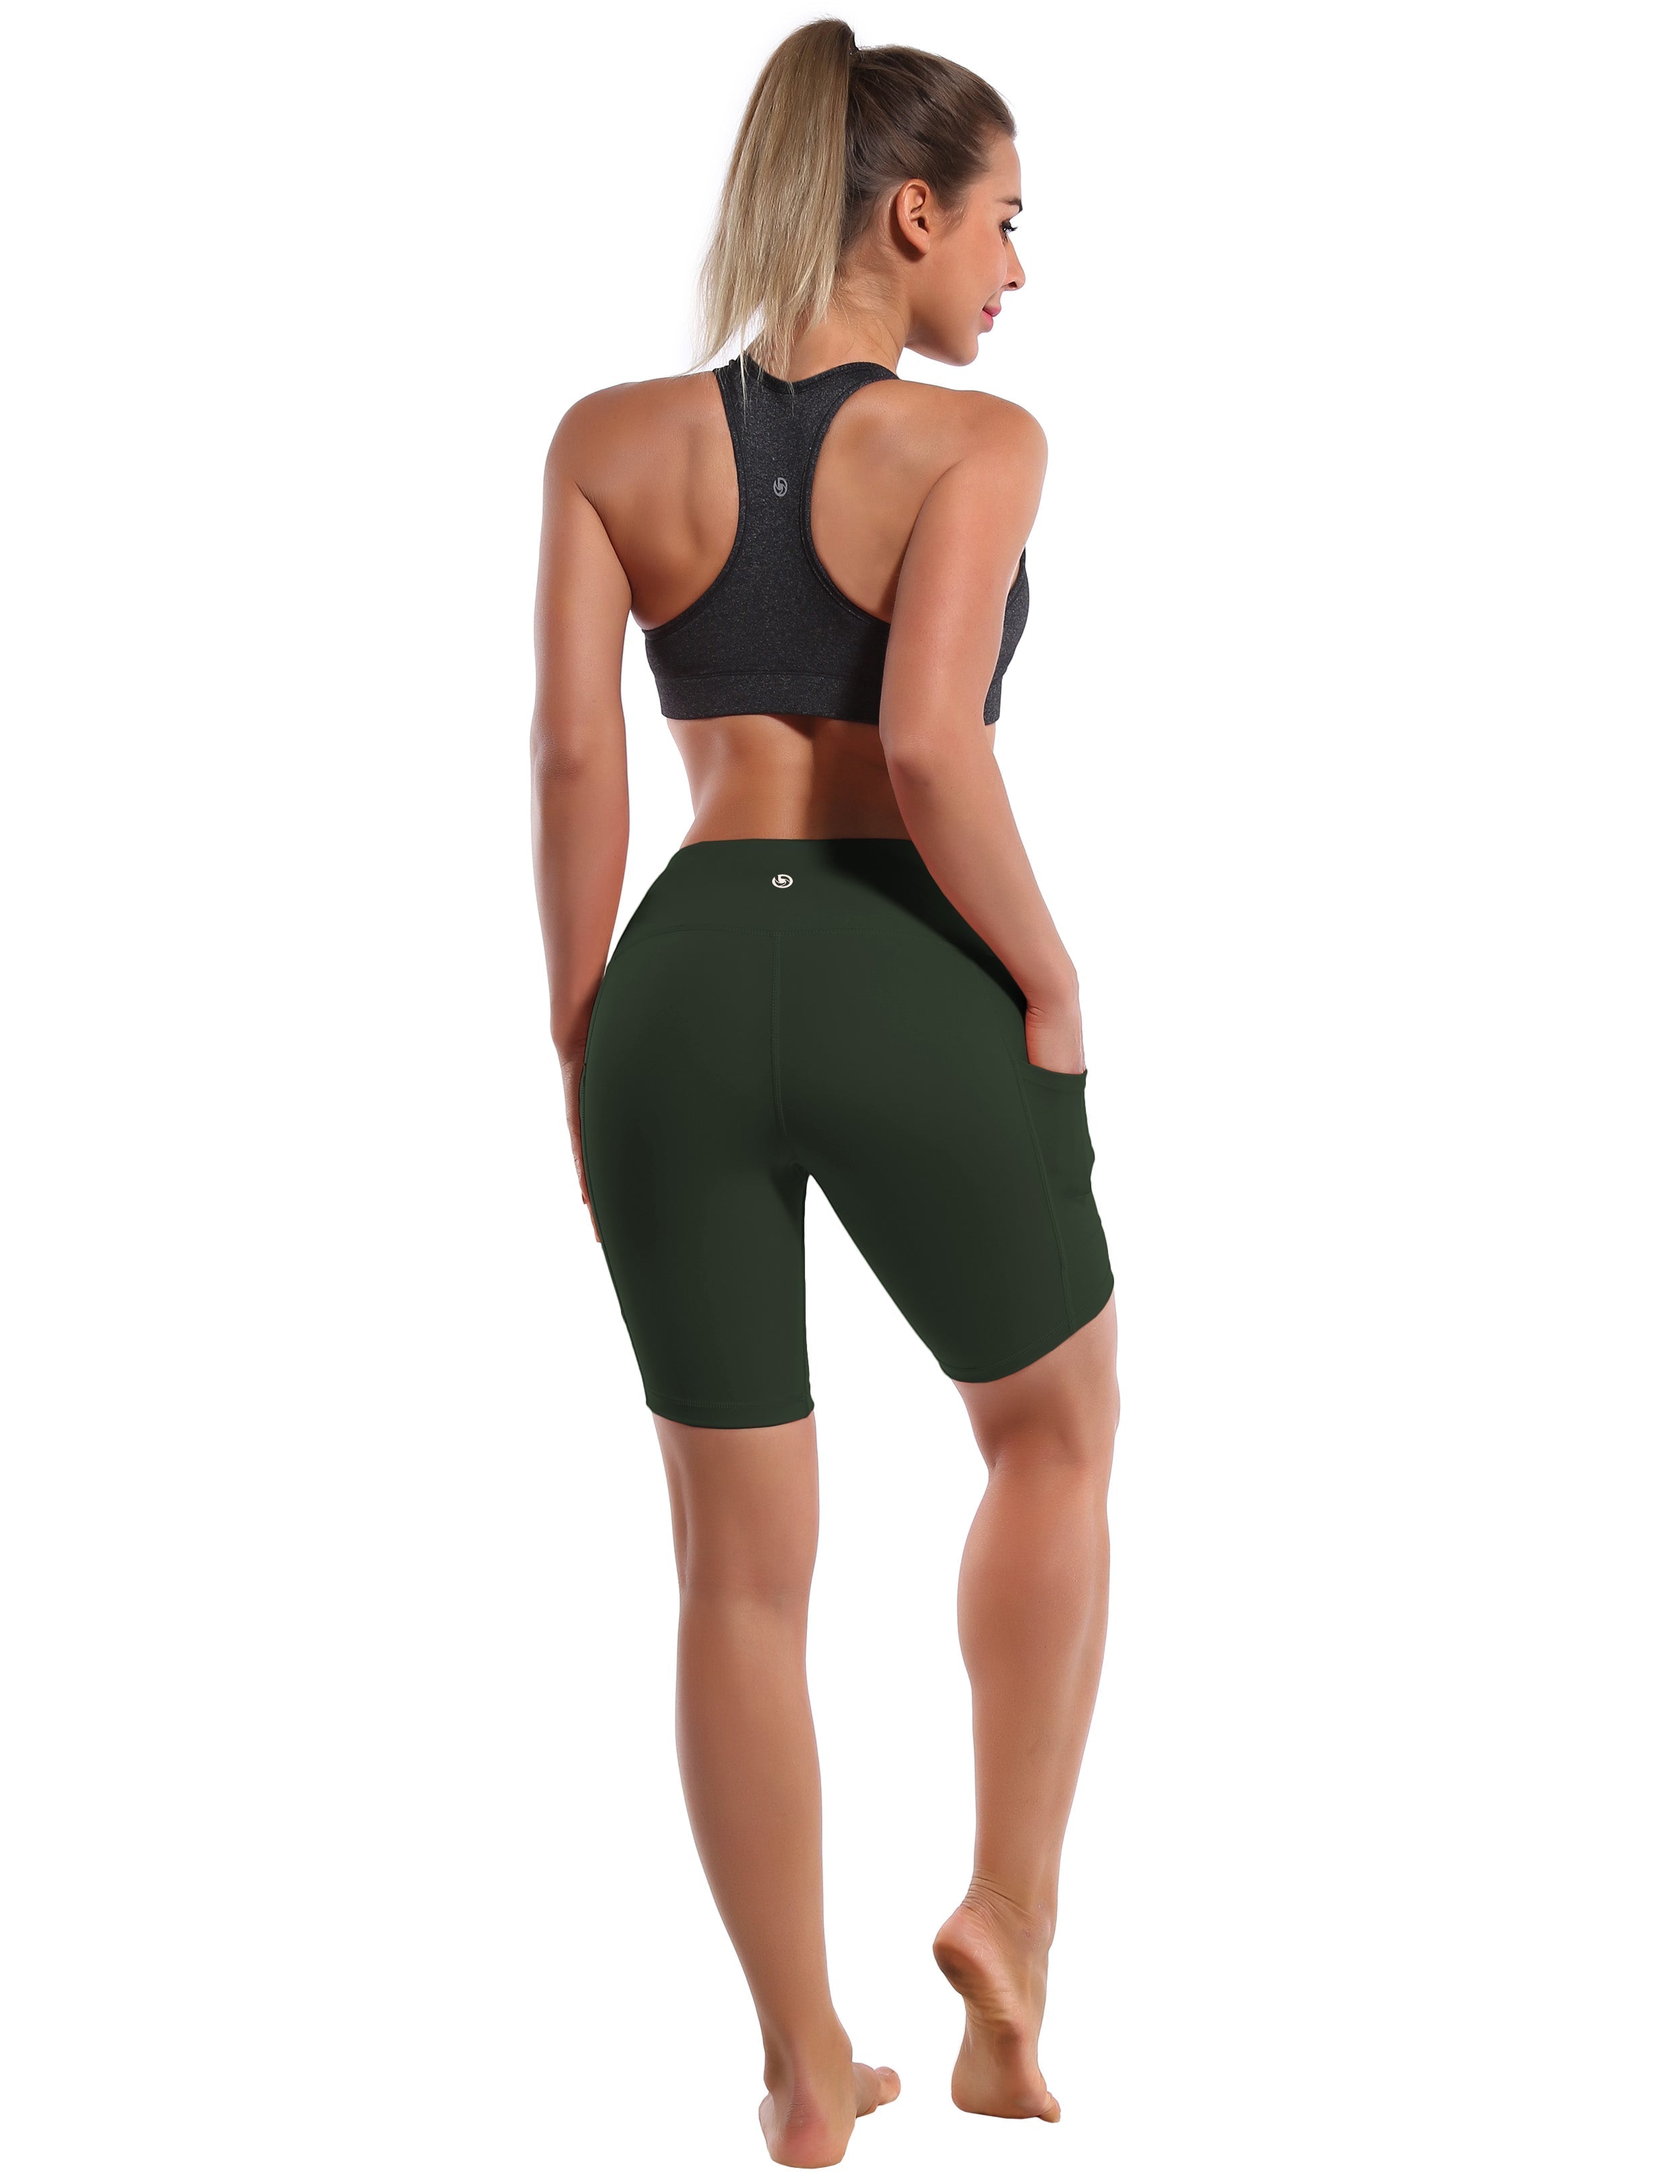 8" Side Pockets Gym Shorts olivegray Sleek, soft, smooth and totally comfortable: our newest style is here. Softest-ever fabric High elasticity High density 4-way stretch Fabric doesn't attract lint easily No see-through Moisture-wicking Machine wash 75% Nylon, 25% Spandex